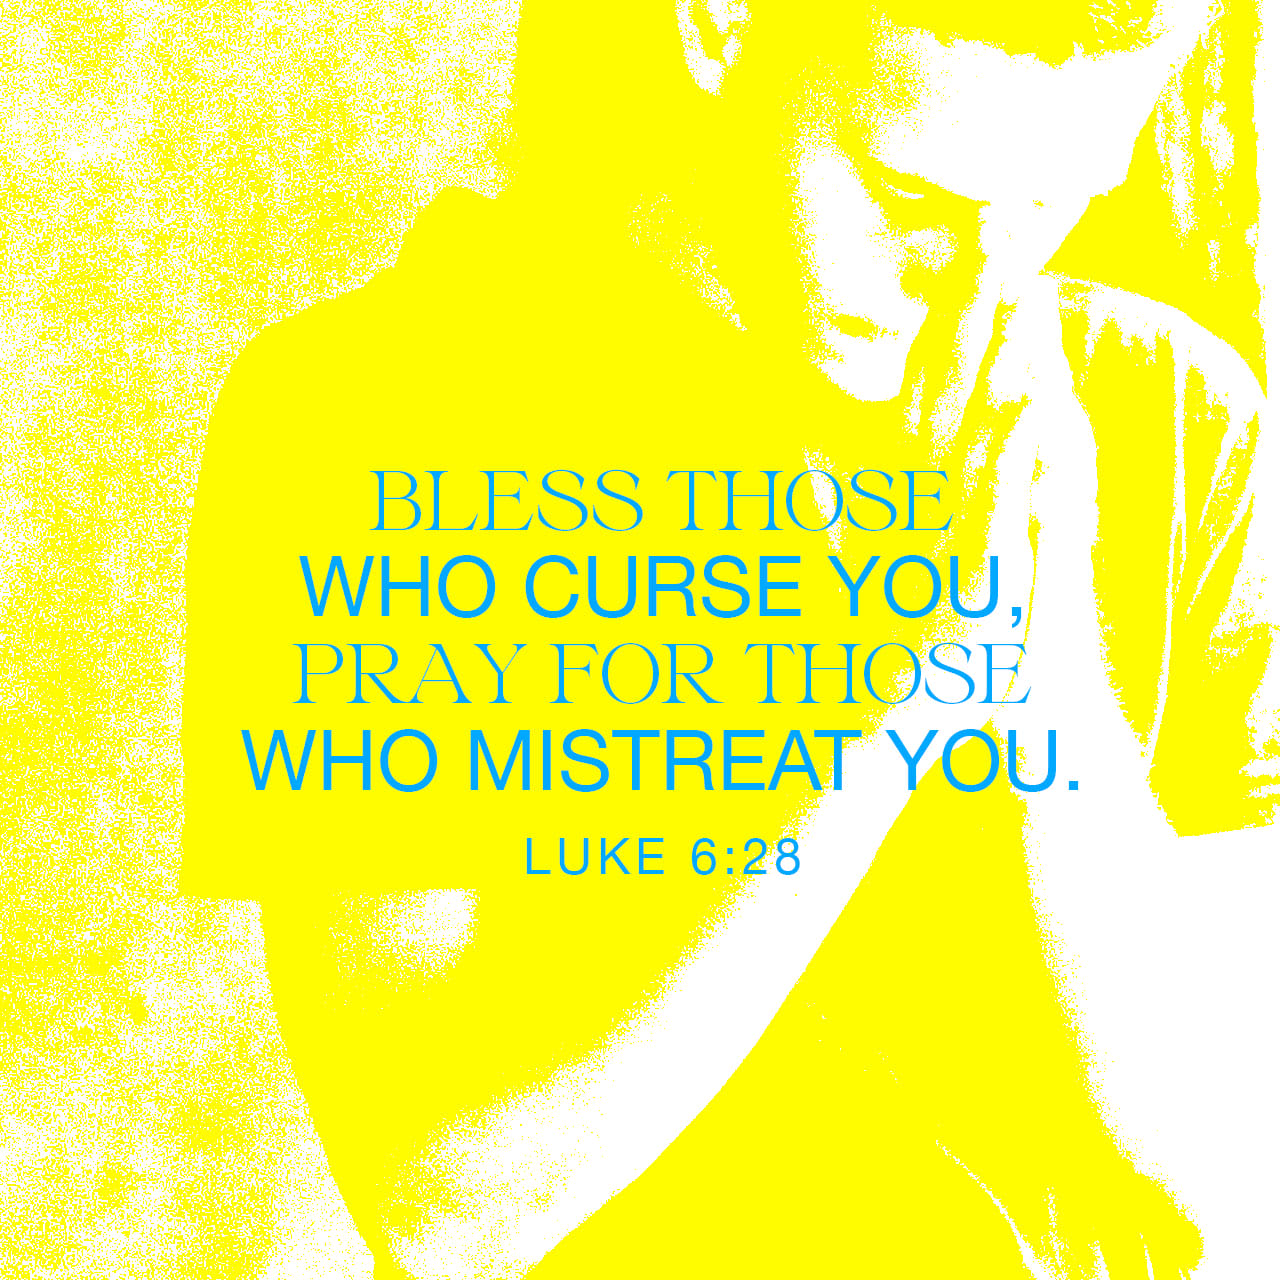 Luke 6:28 bless them that curse you, and pray for them which despitefully use you. | King James Version (KJV) | Download The Bible App Now